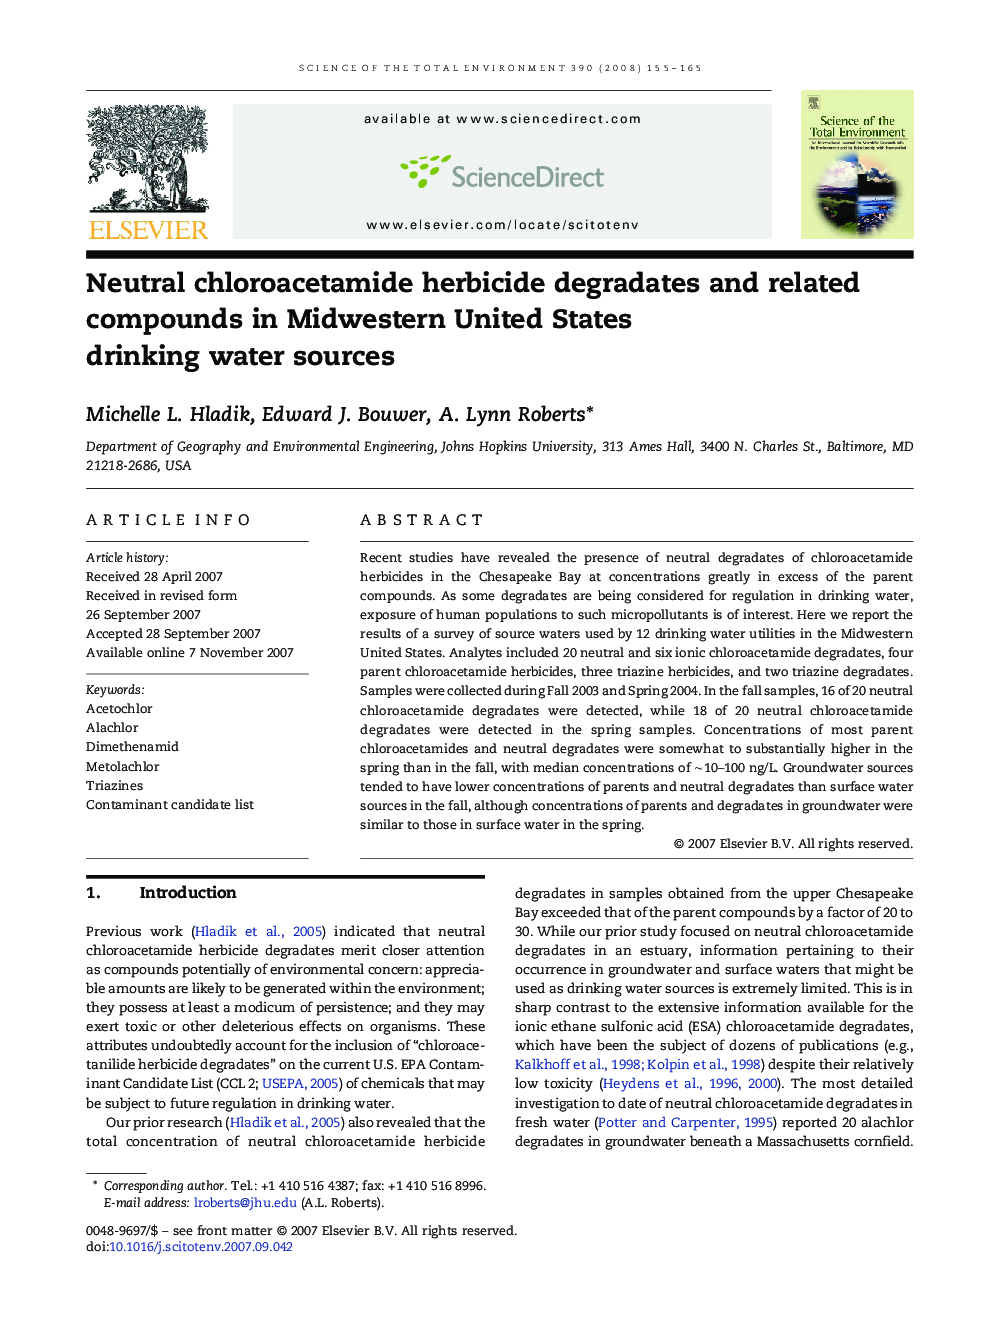 Neutral chloroacetamide herbicide degradates and related compounds in Midwestern United States drinking water sources